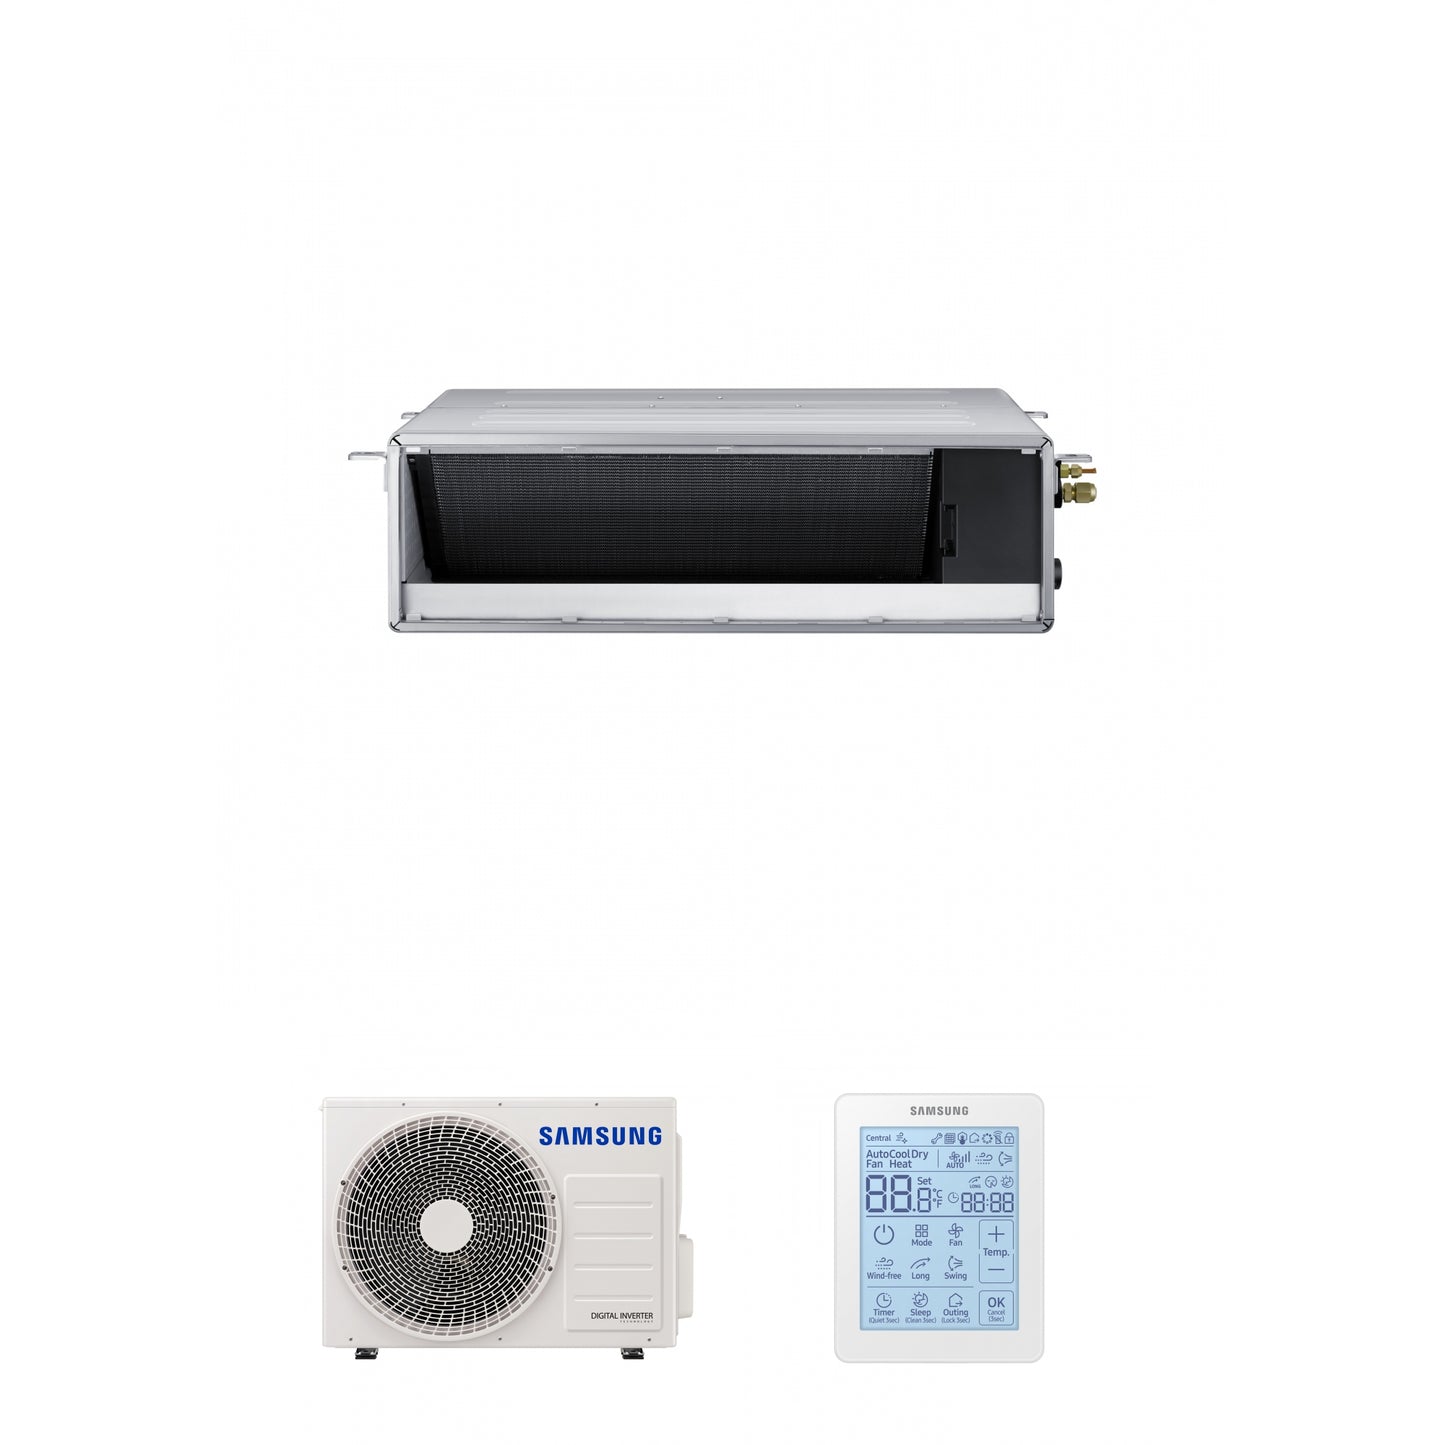 Samsung CAC 5.2kW Ducted high efficiency unit with simplified wired controller